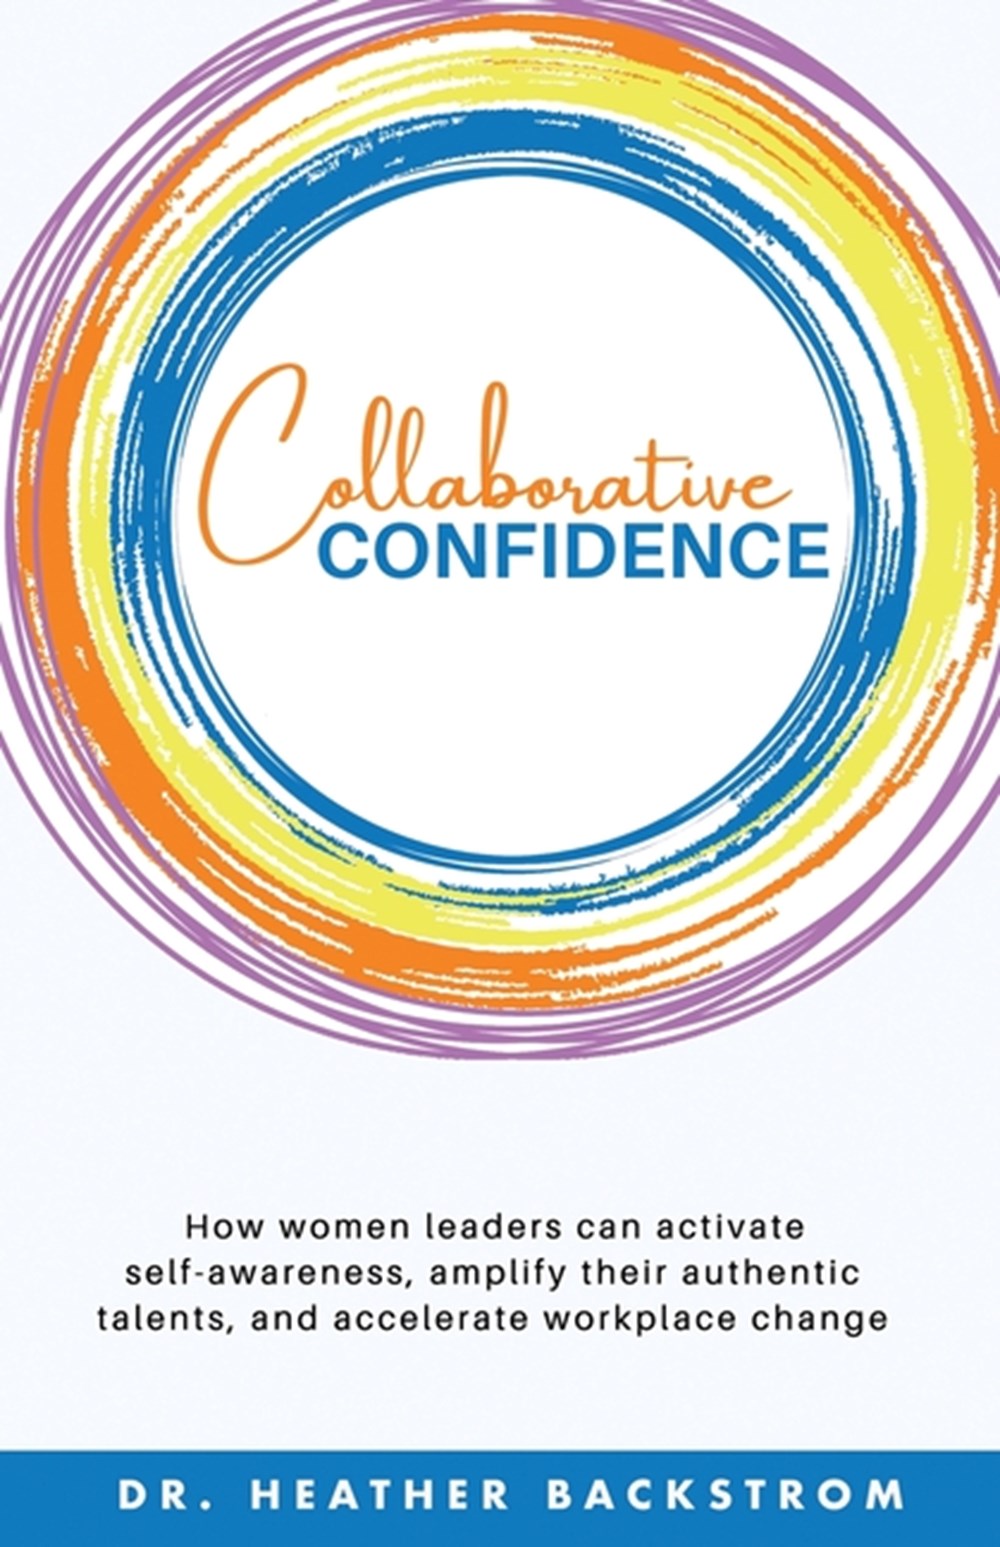 Collaborative Confidence: How women leaders can activate self-awareness, amplify their authentic tal